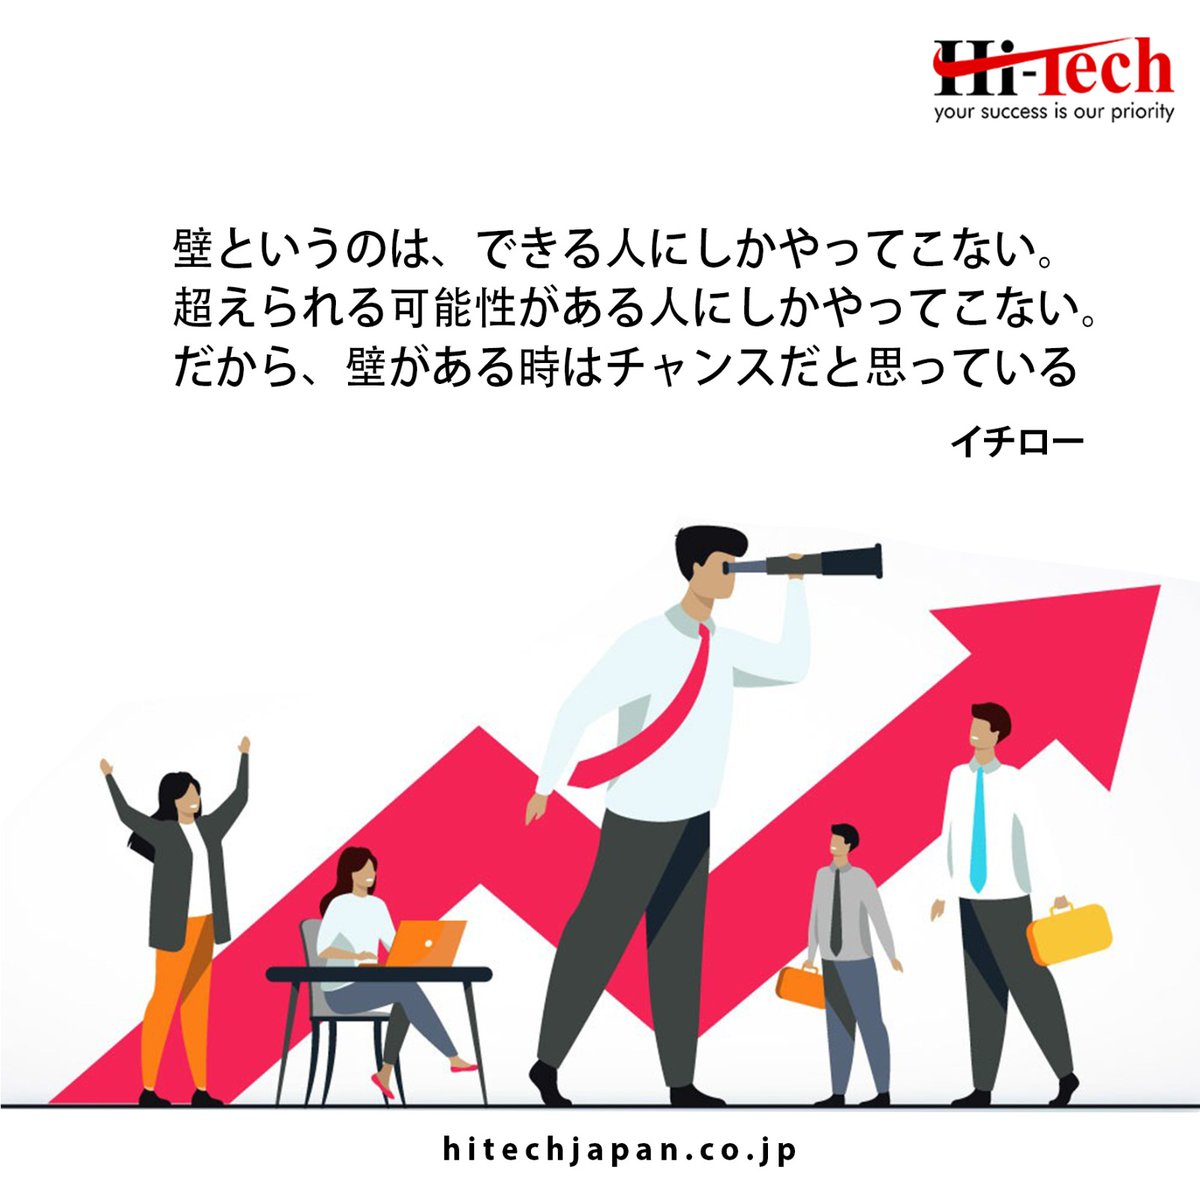 Embrace walls as opportunities. 

When faced with obstacles, those with the potential to overcome them see walls as stepping stones towards greatness.

Follow our page for regular updates.

#hitechjapan #東京 #日本 #japan #recruitment #japanjobs #hiring #bilingualjobs #technology